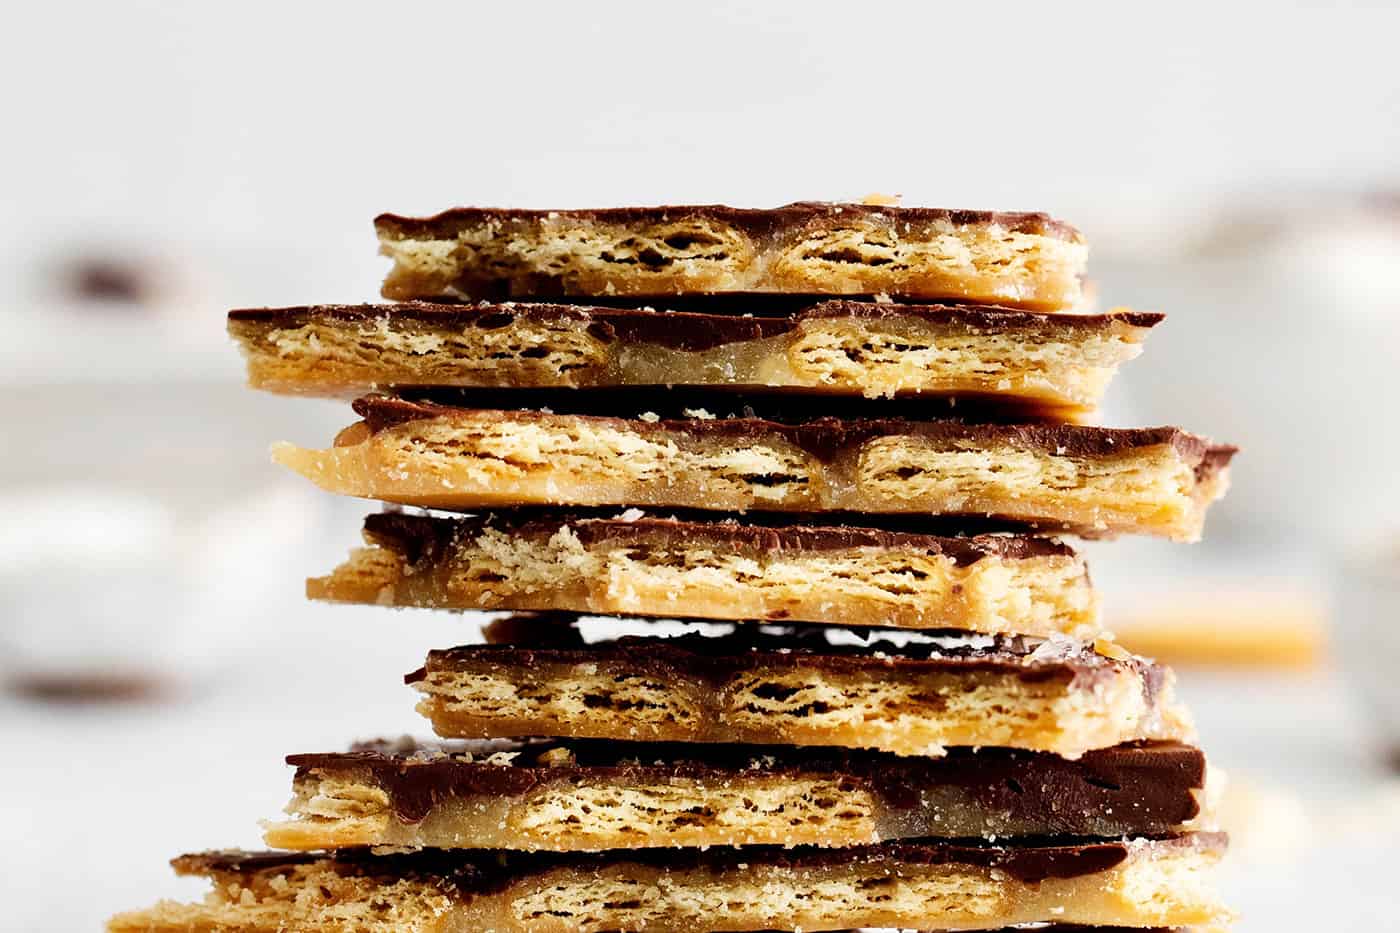 a close-up photo of a stack of Ritz cracker toffee